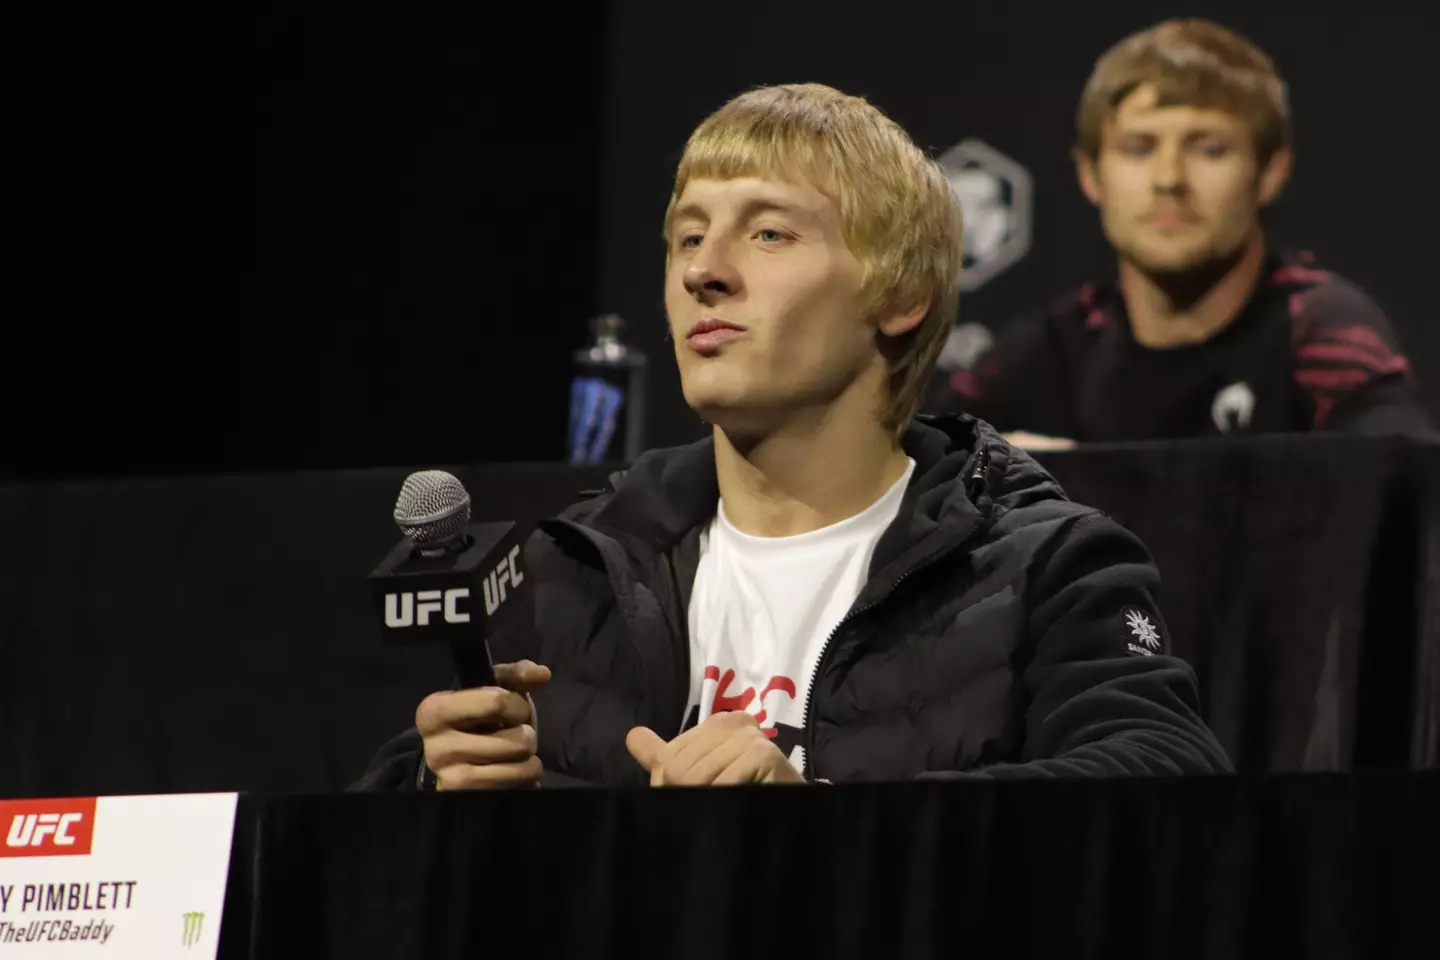 Pimblett at a UFC media day earlier this month. (Image